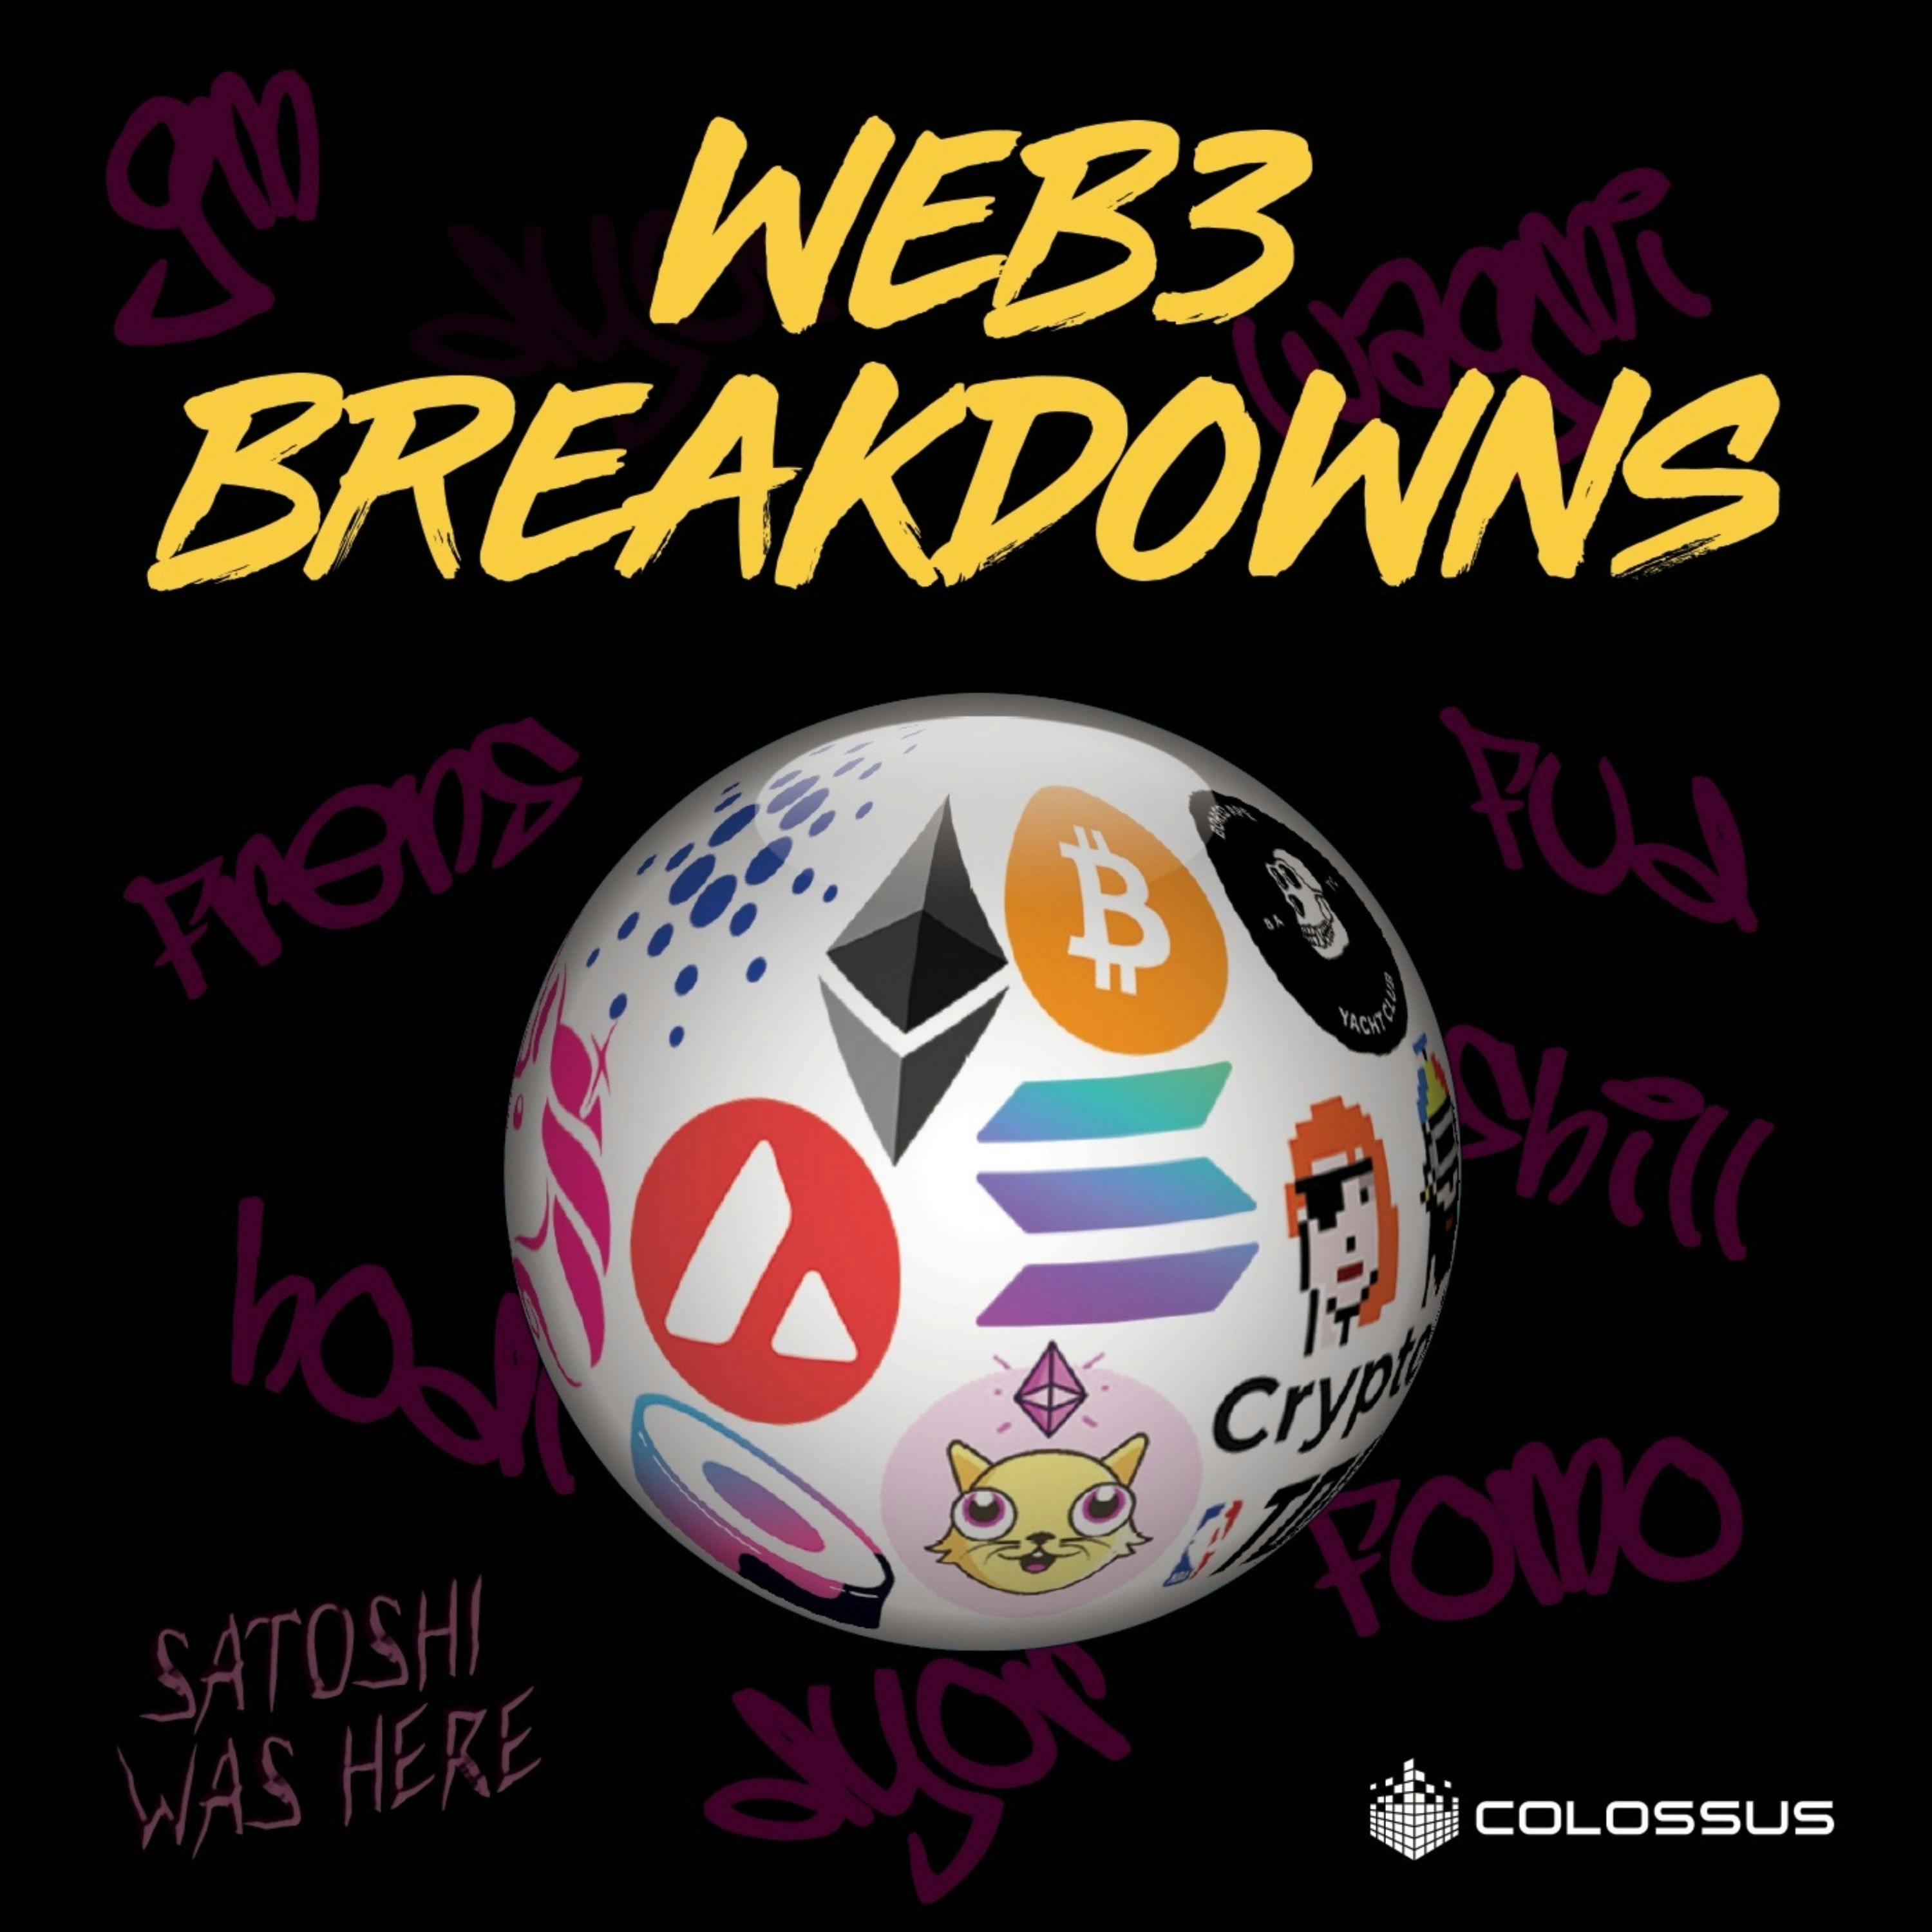 Welcome to Web3 Breakdowns